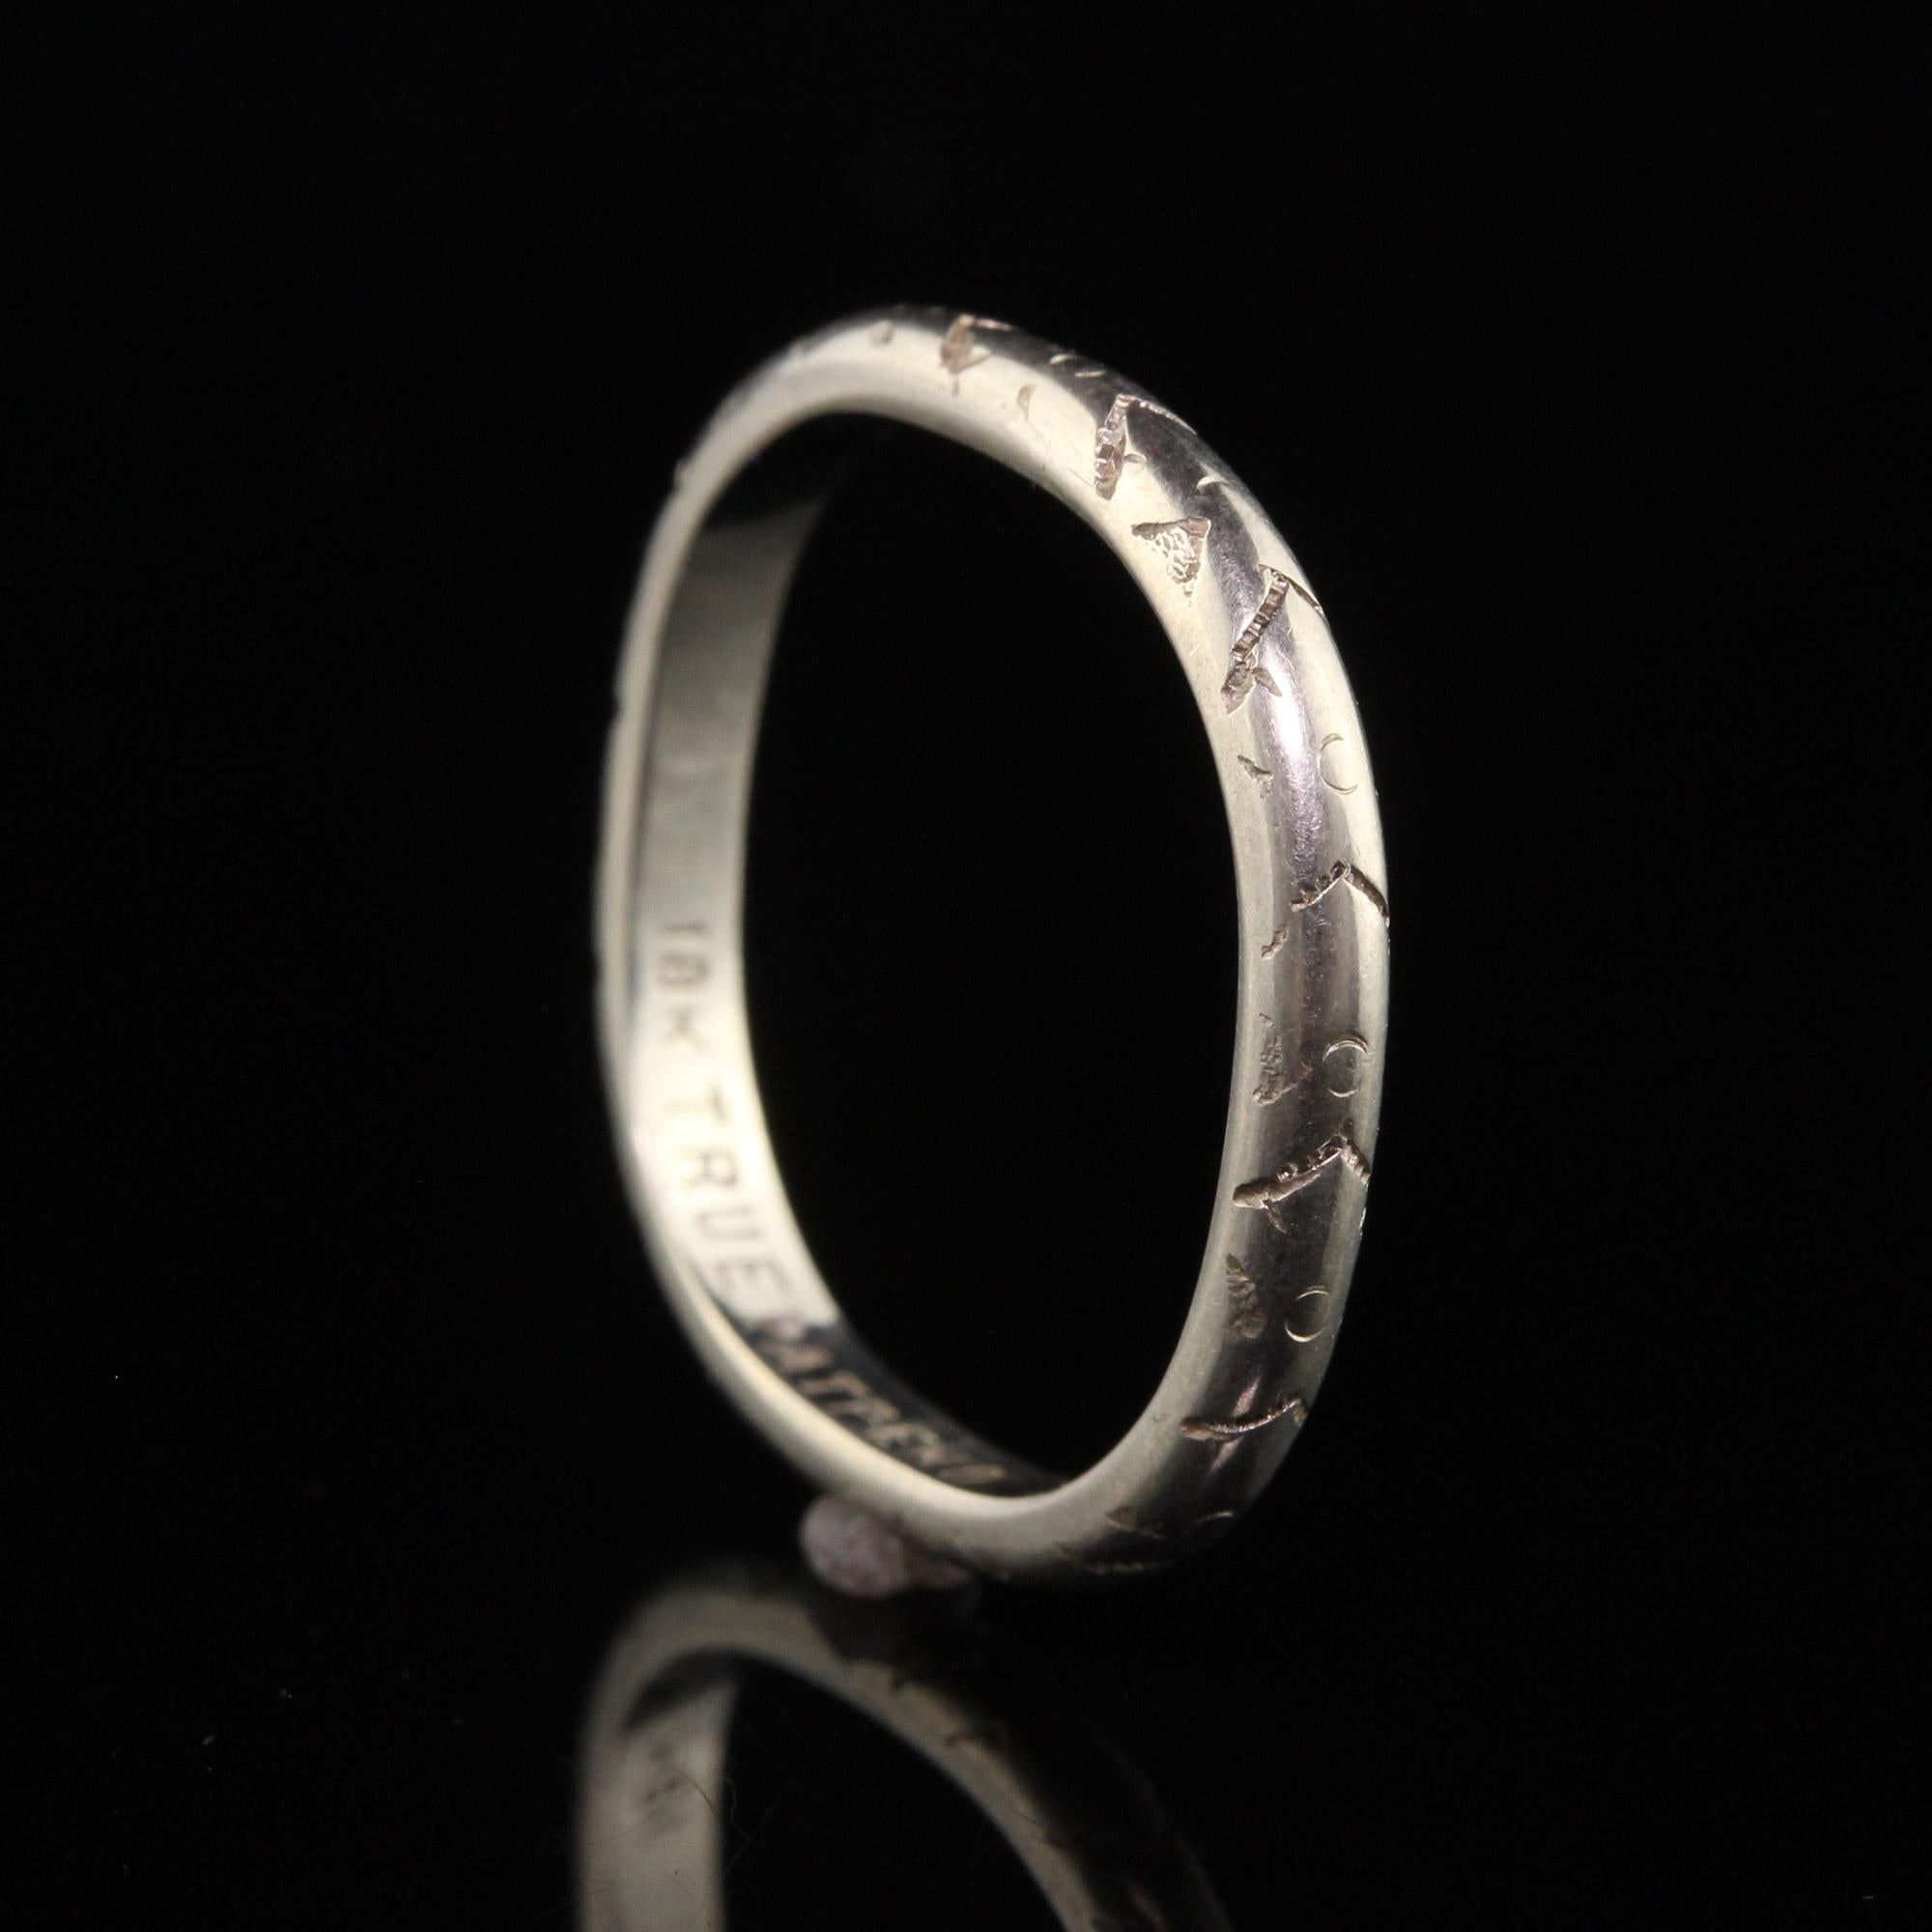 Antique Art Deco 18K White Gold Engraved Squared Wedding Band For Sale 2